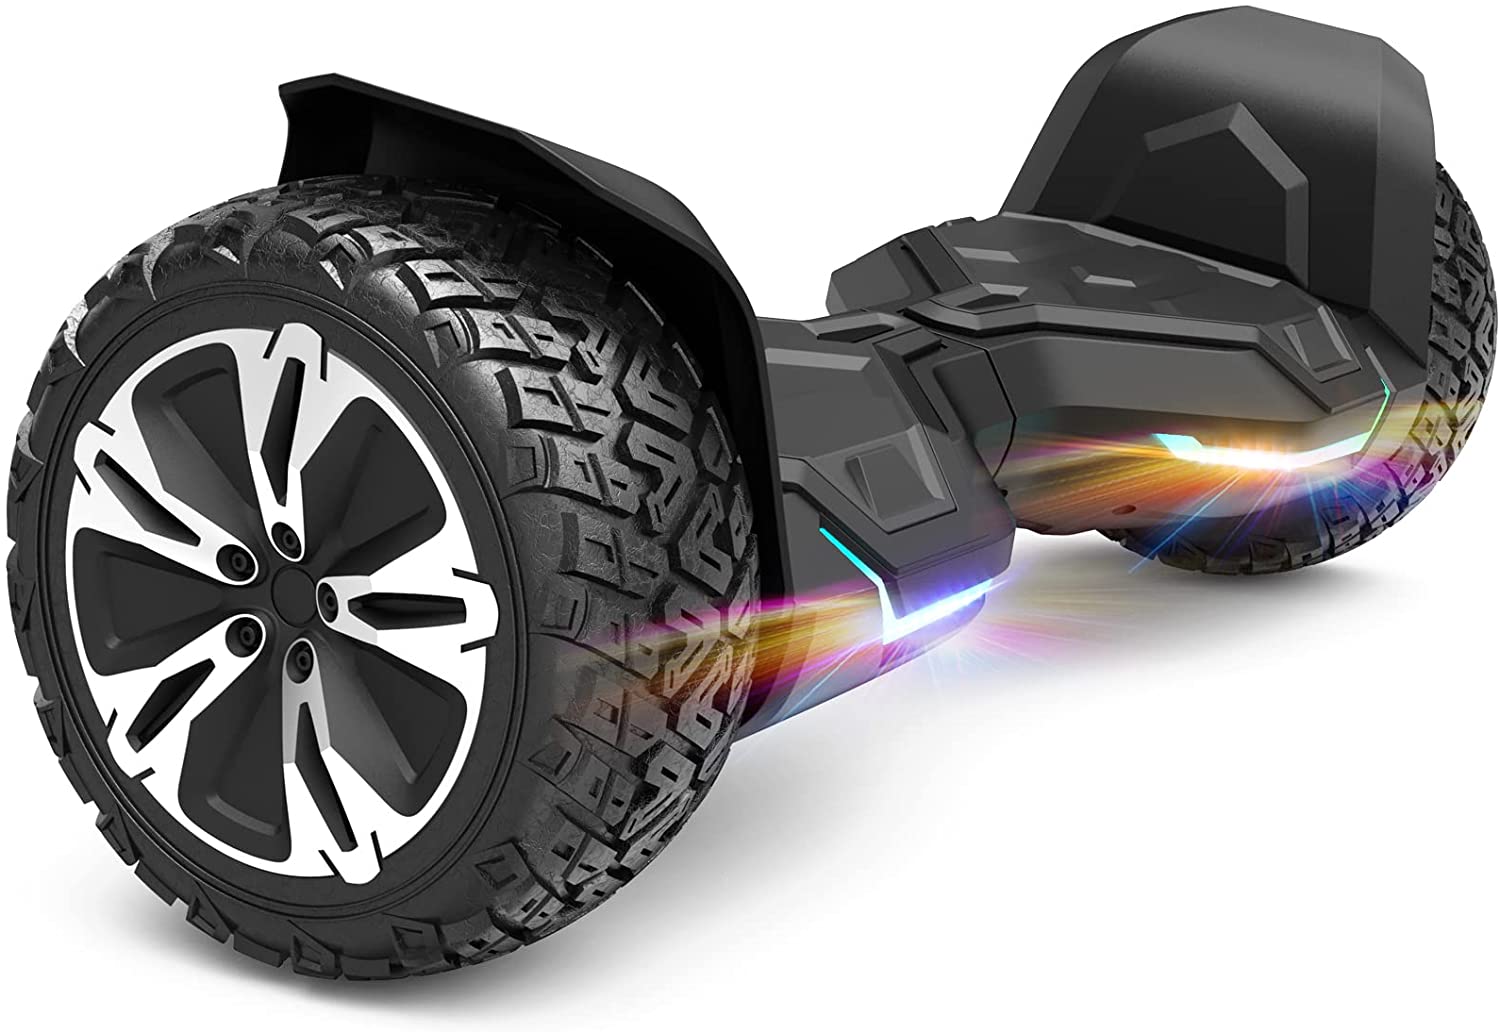 Gyroor Warrior 8.5″ Hoverboard – Top Rated All-terrain Hoverboard